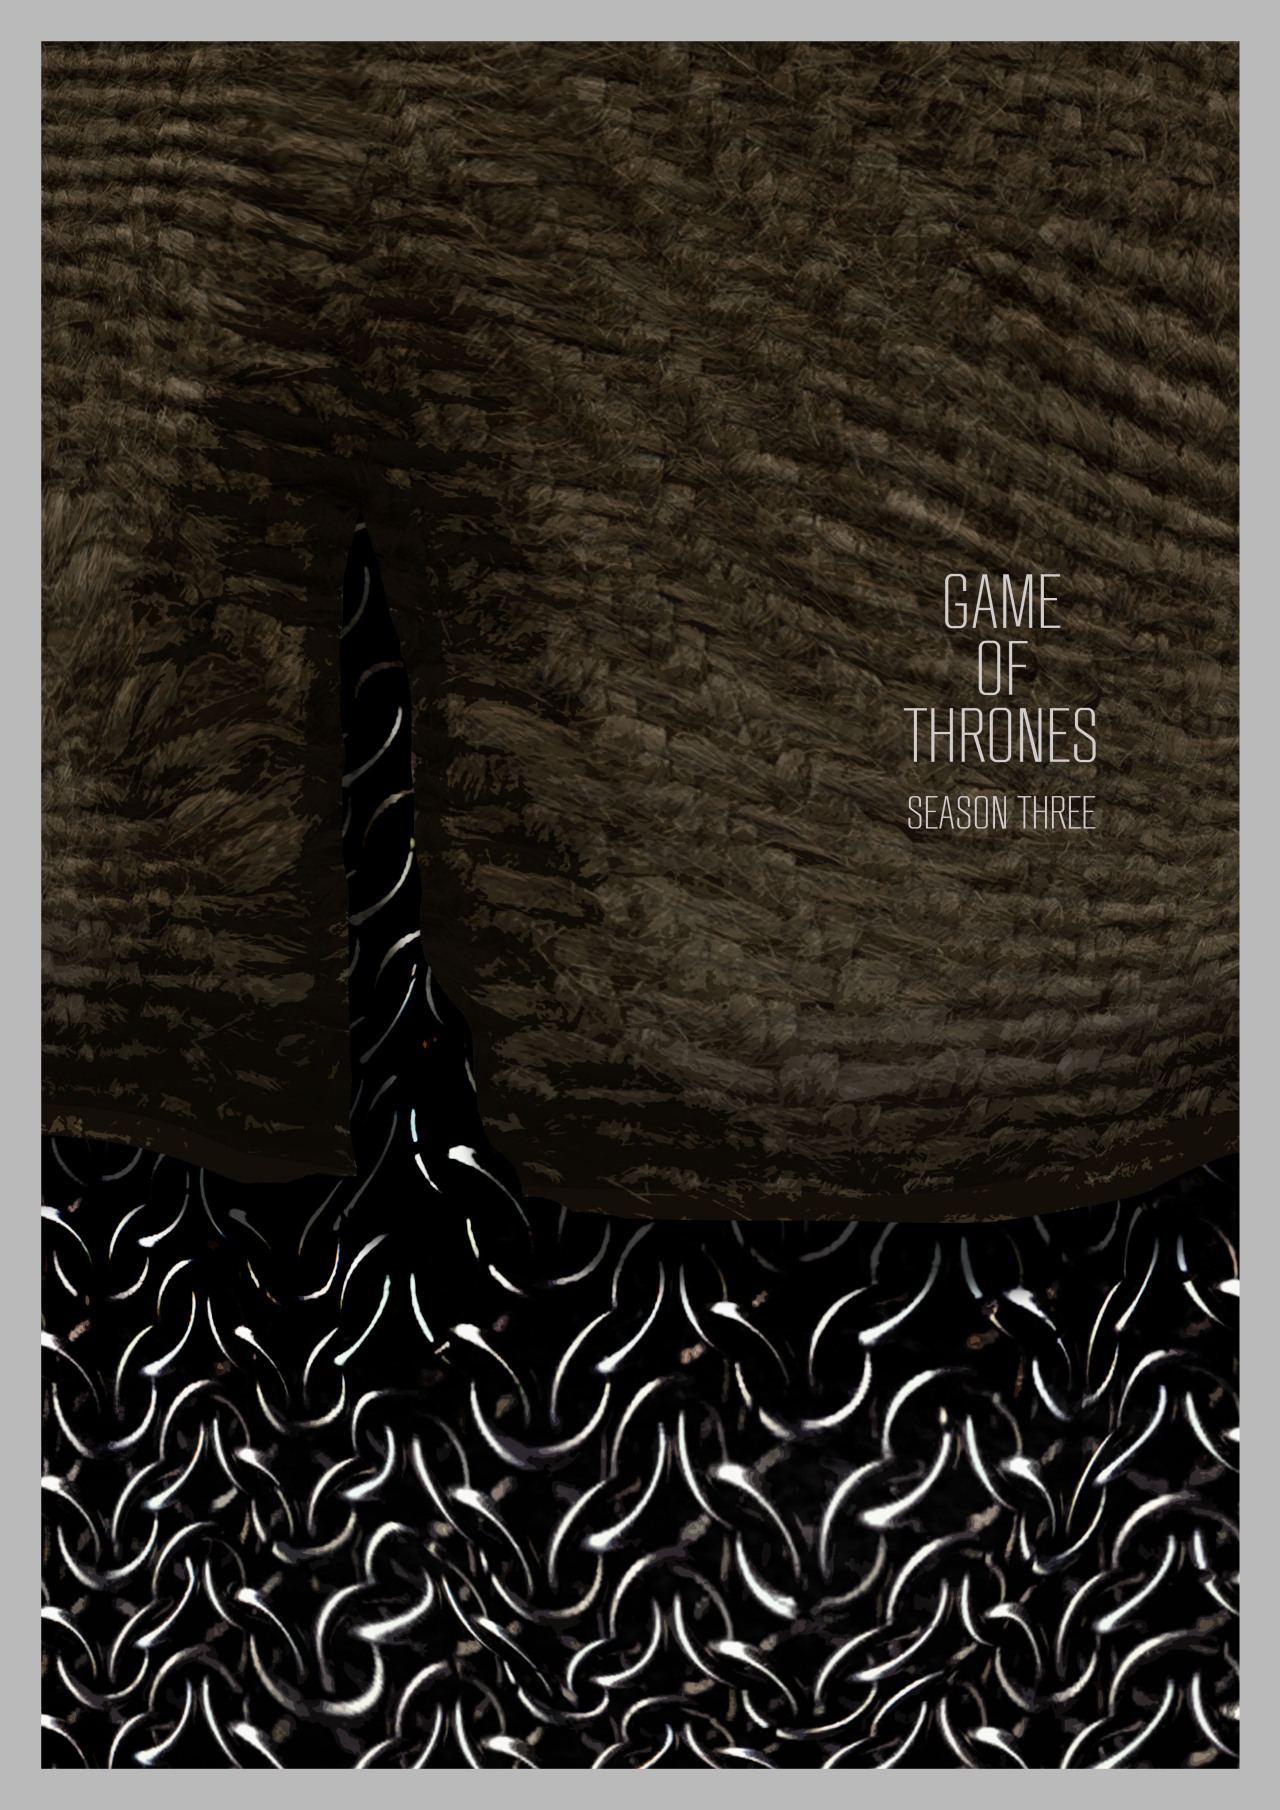 Game of Thrones Season 3 poster.